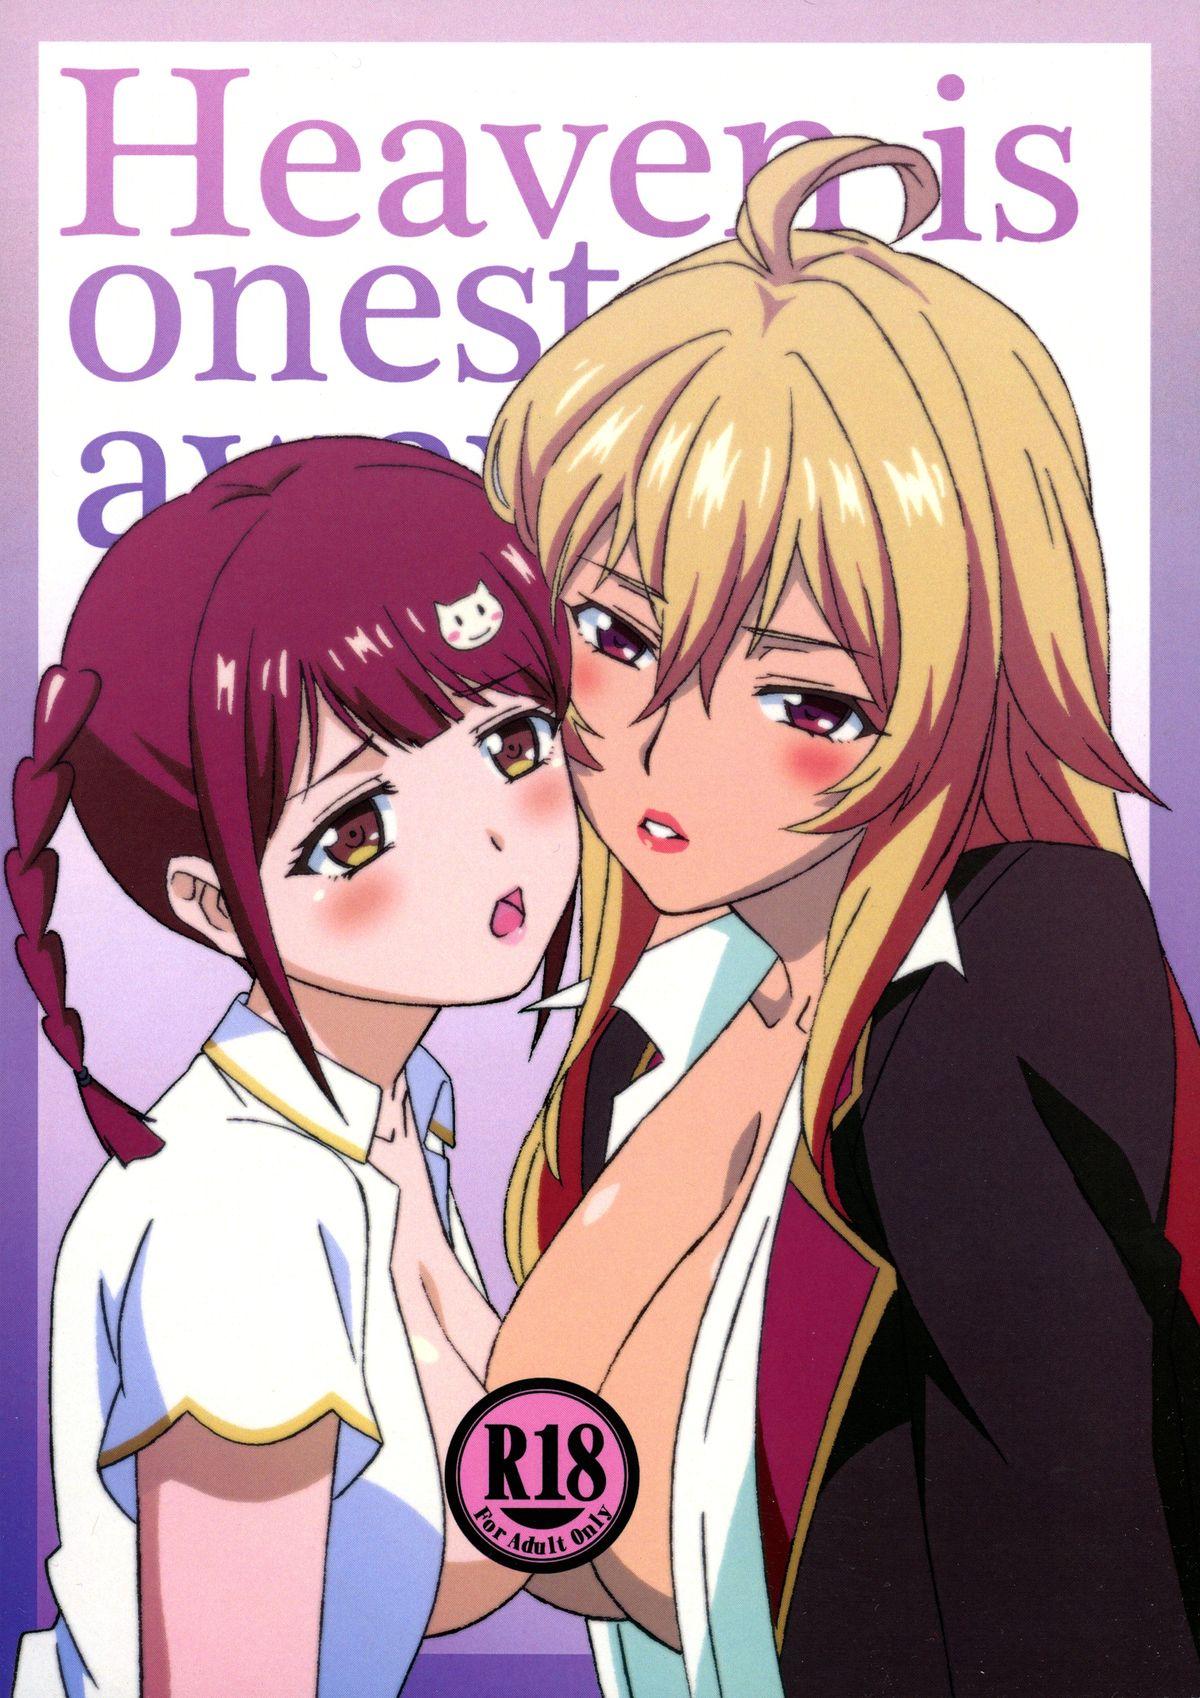 Gloryholes Heaven is one step away 2 - Valkyrie drive Animated - Picture 1